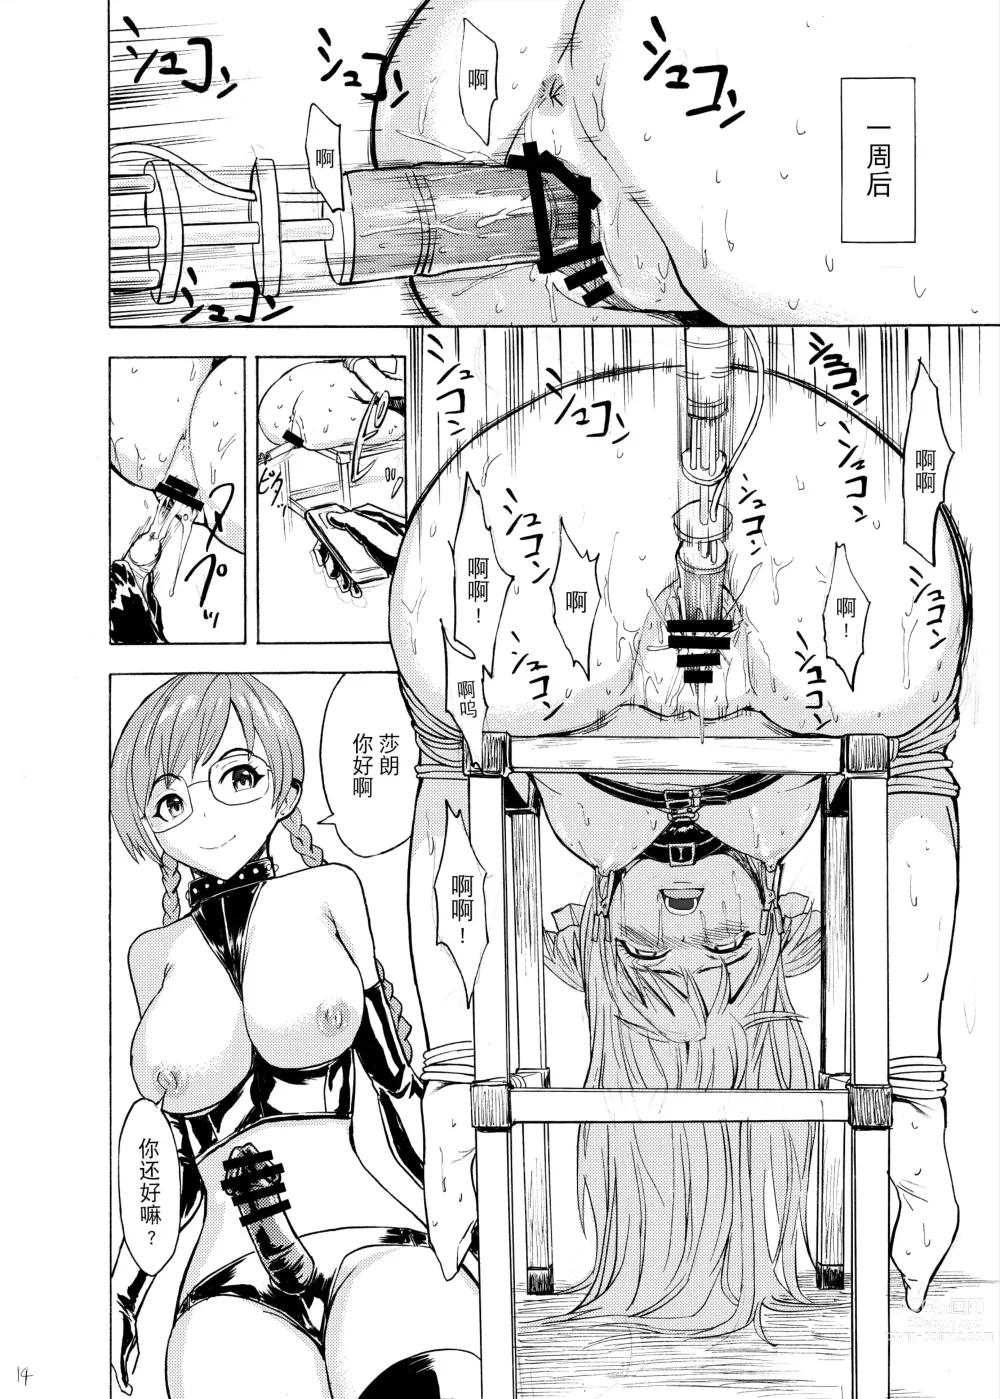 Page 14 of doujinshi  魔法学园的幕后 献祭者育成计划